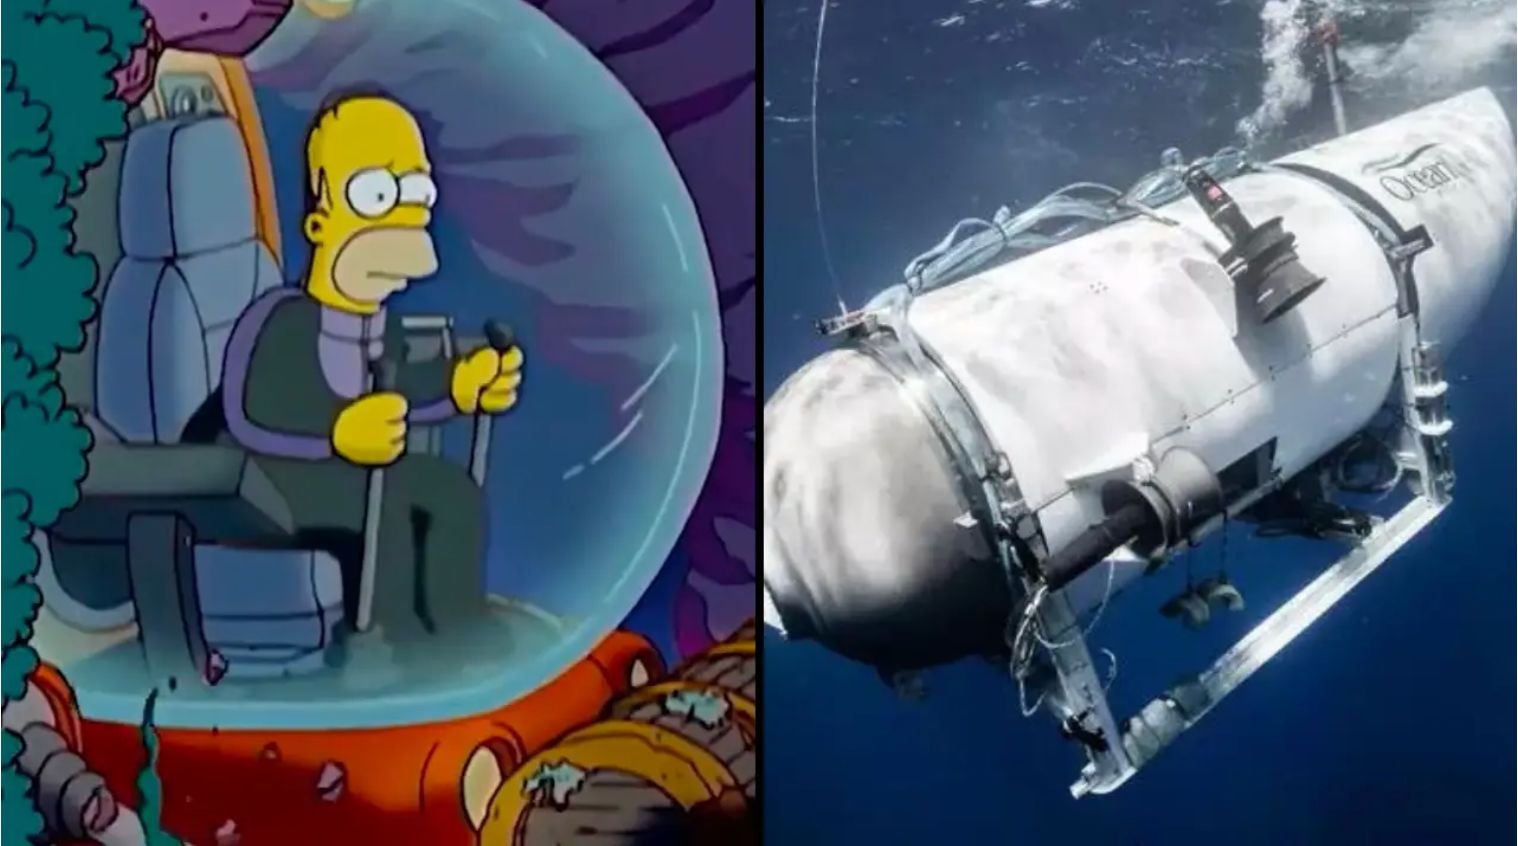 The Simpsons Fans Claim Show Predicted Titanic Submersible Disaster In 2006